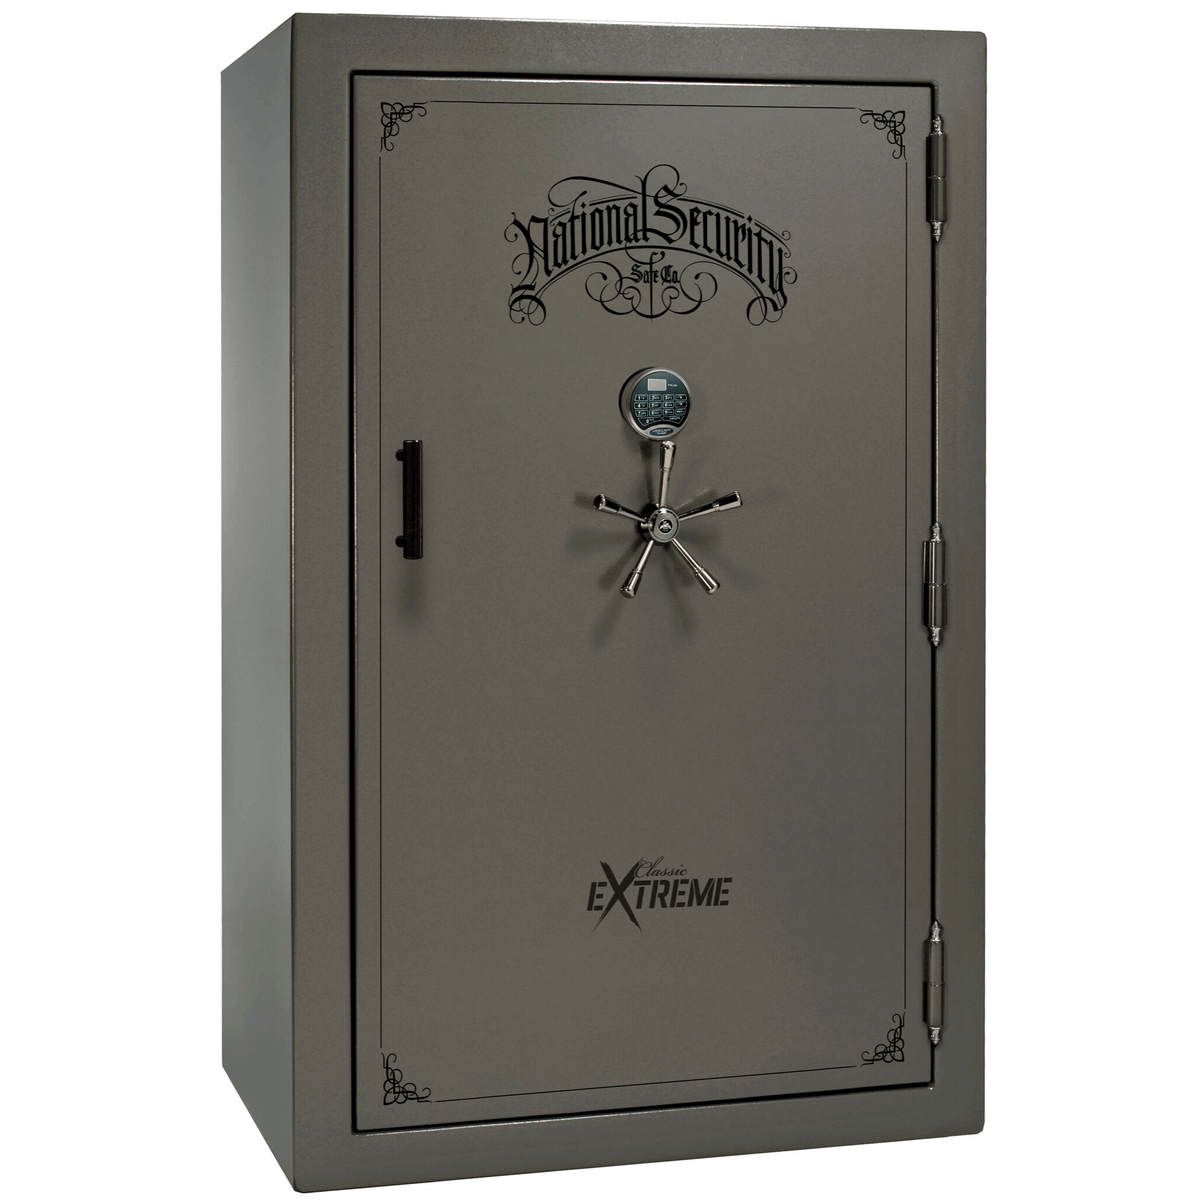 Liberty Classic Select Extreme Wide Body Safe in Gray Marble with Black Chrome Electronic Lock.